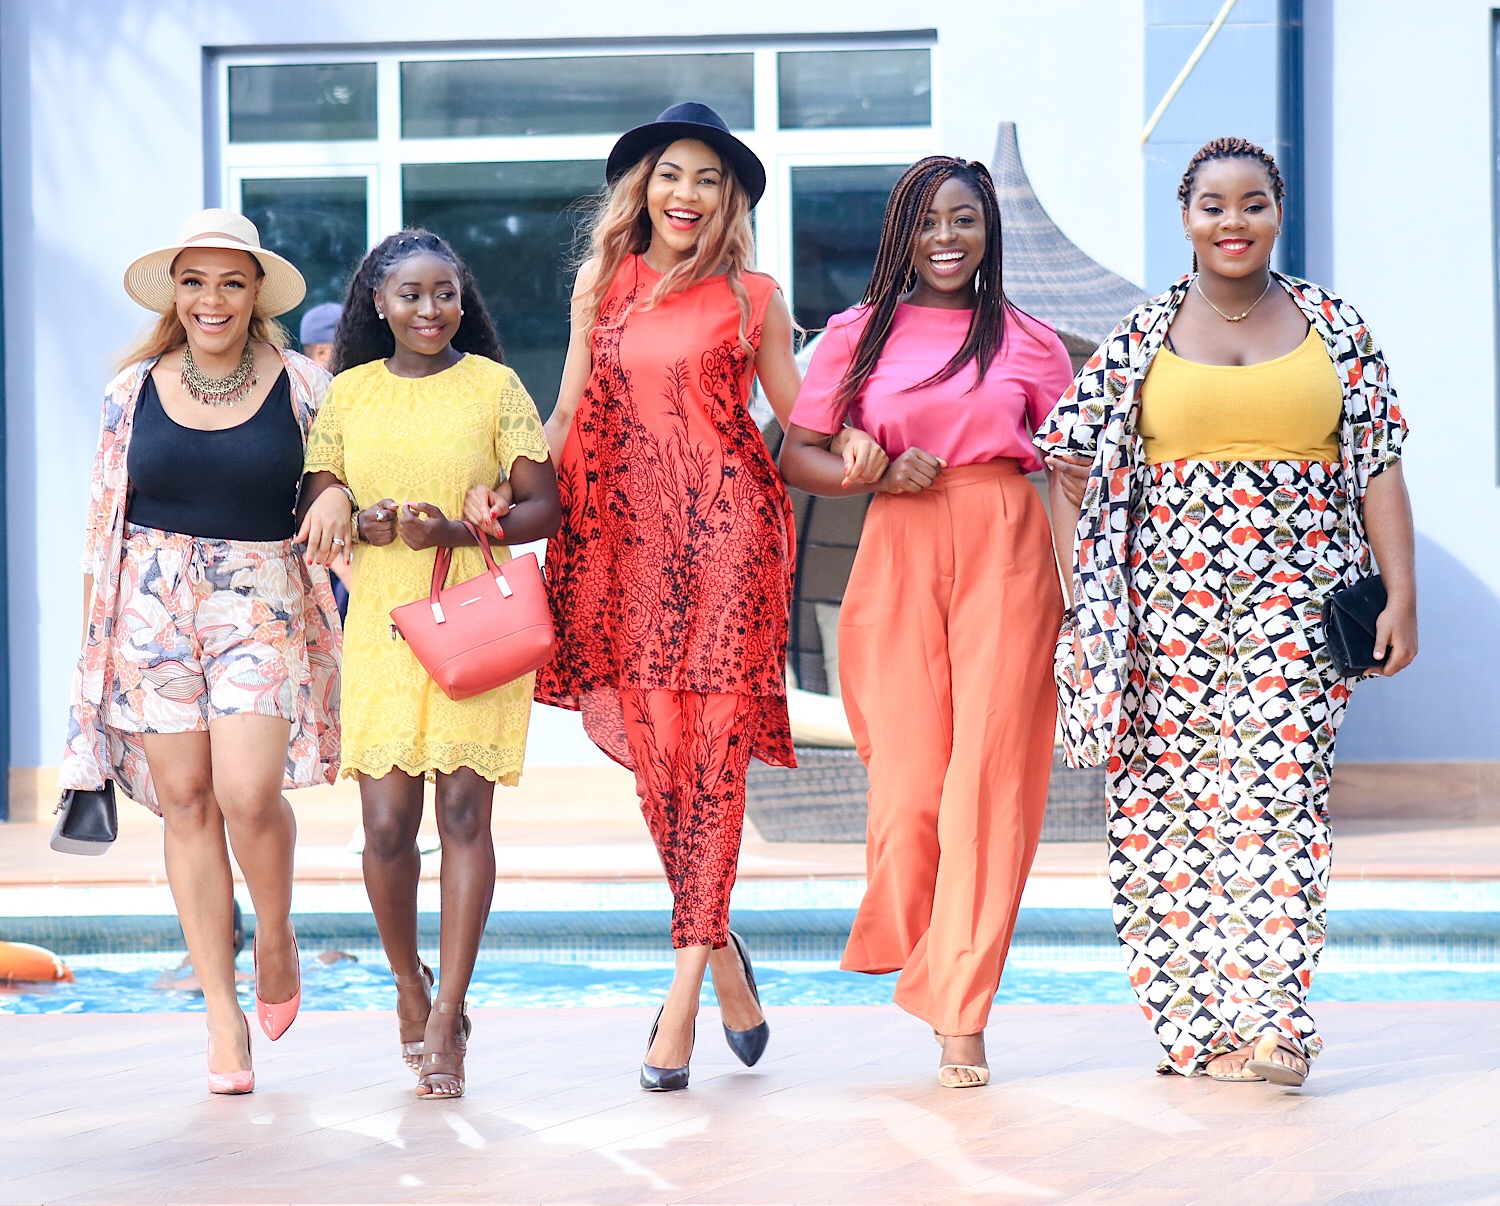 5 Bloggers Take On How To Dress According To Your Body Shape